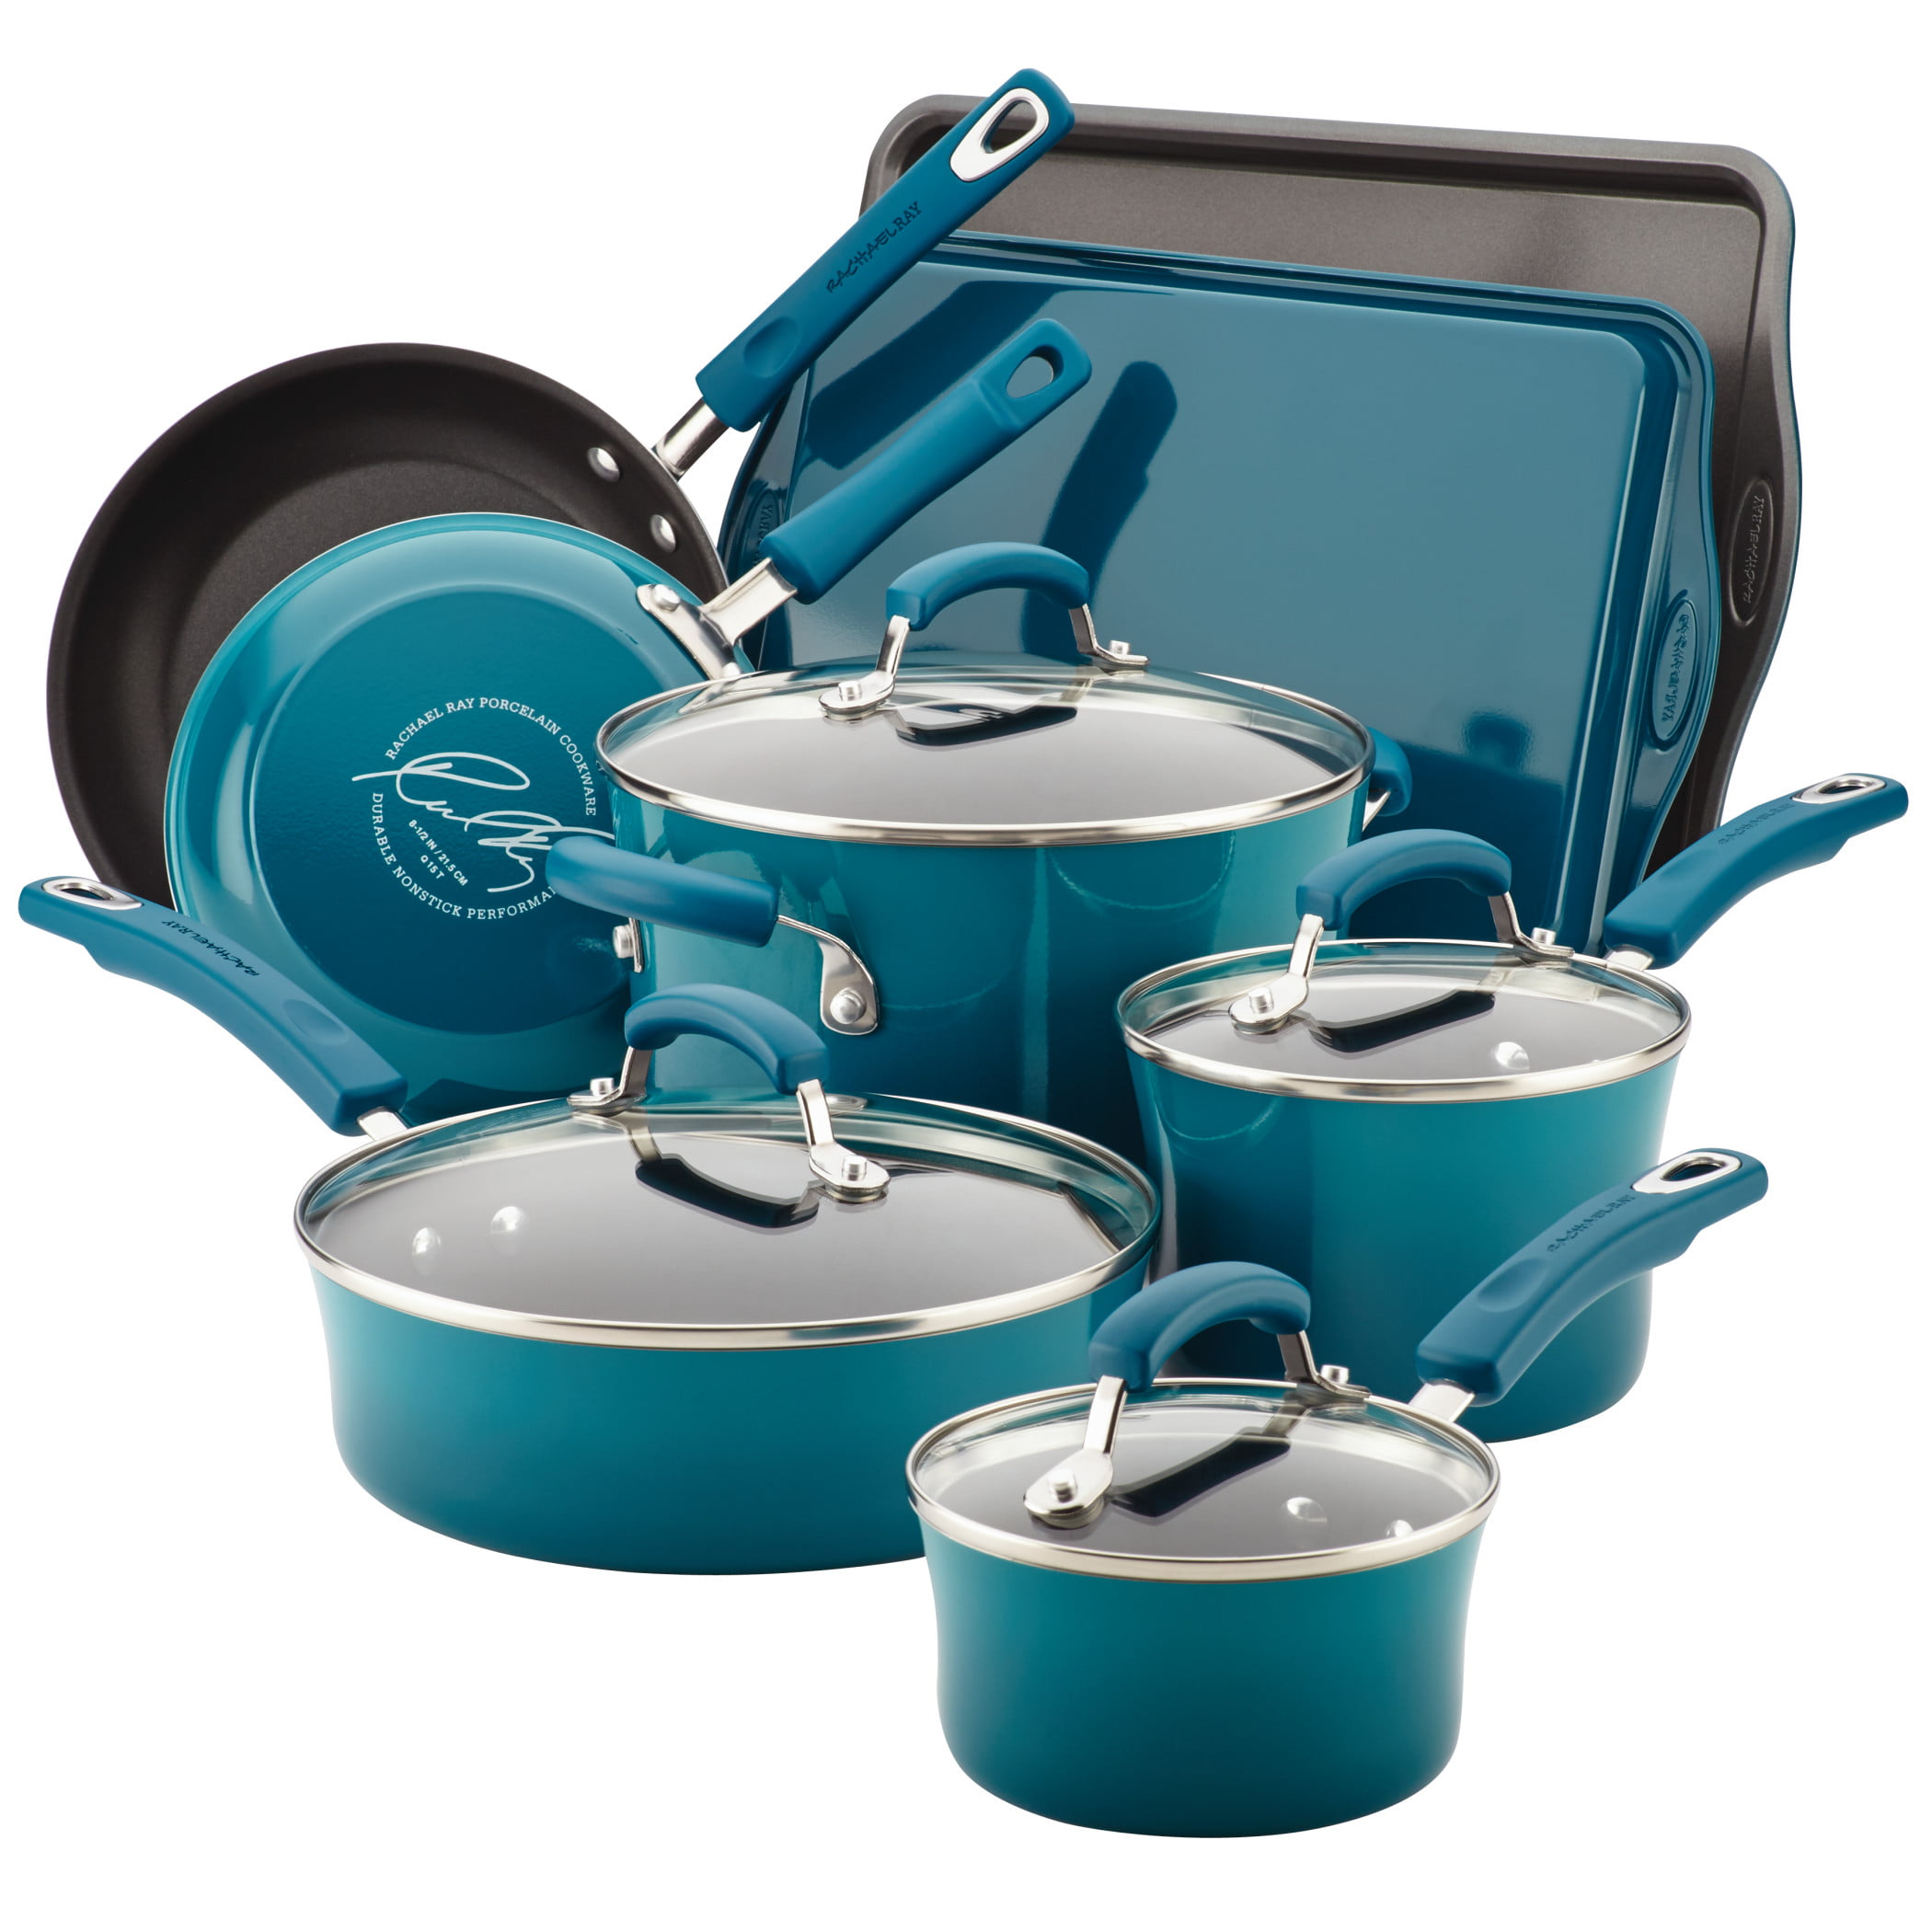 Rachael Ray's 12-piece cookware set is my all-time favorite